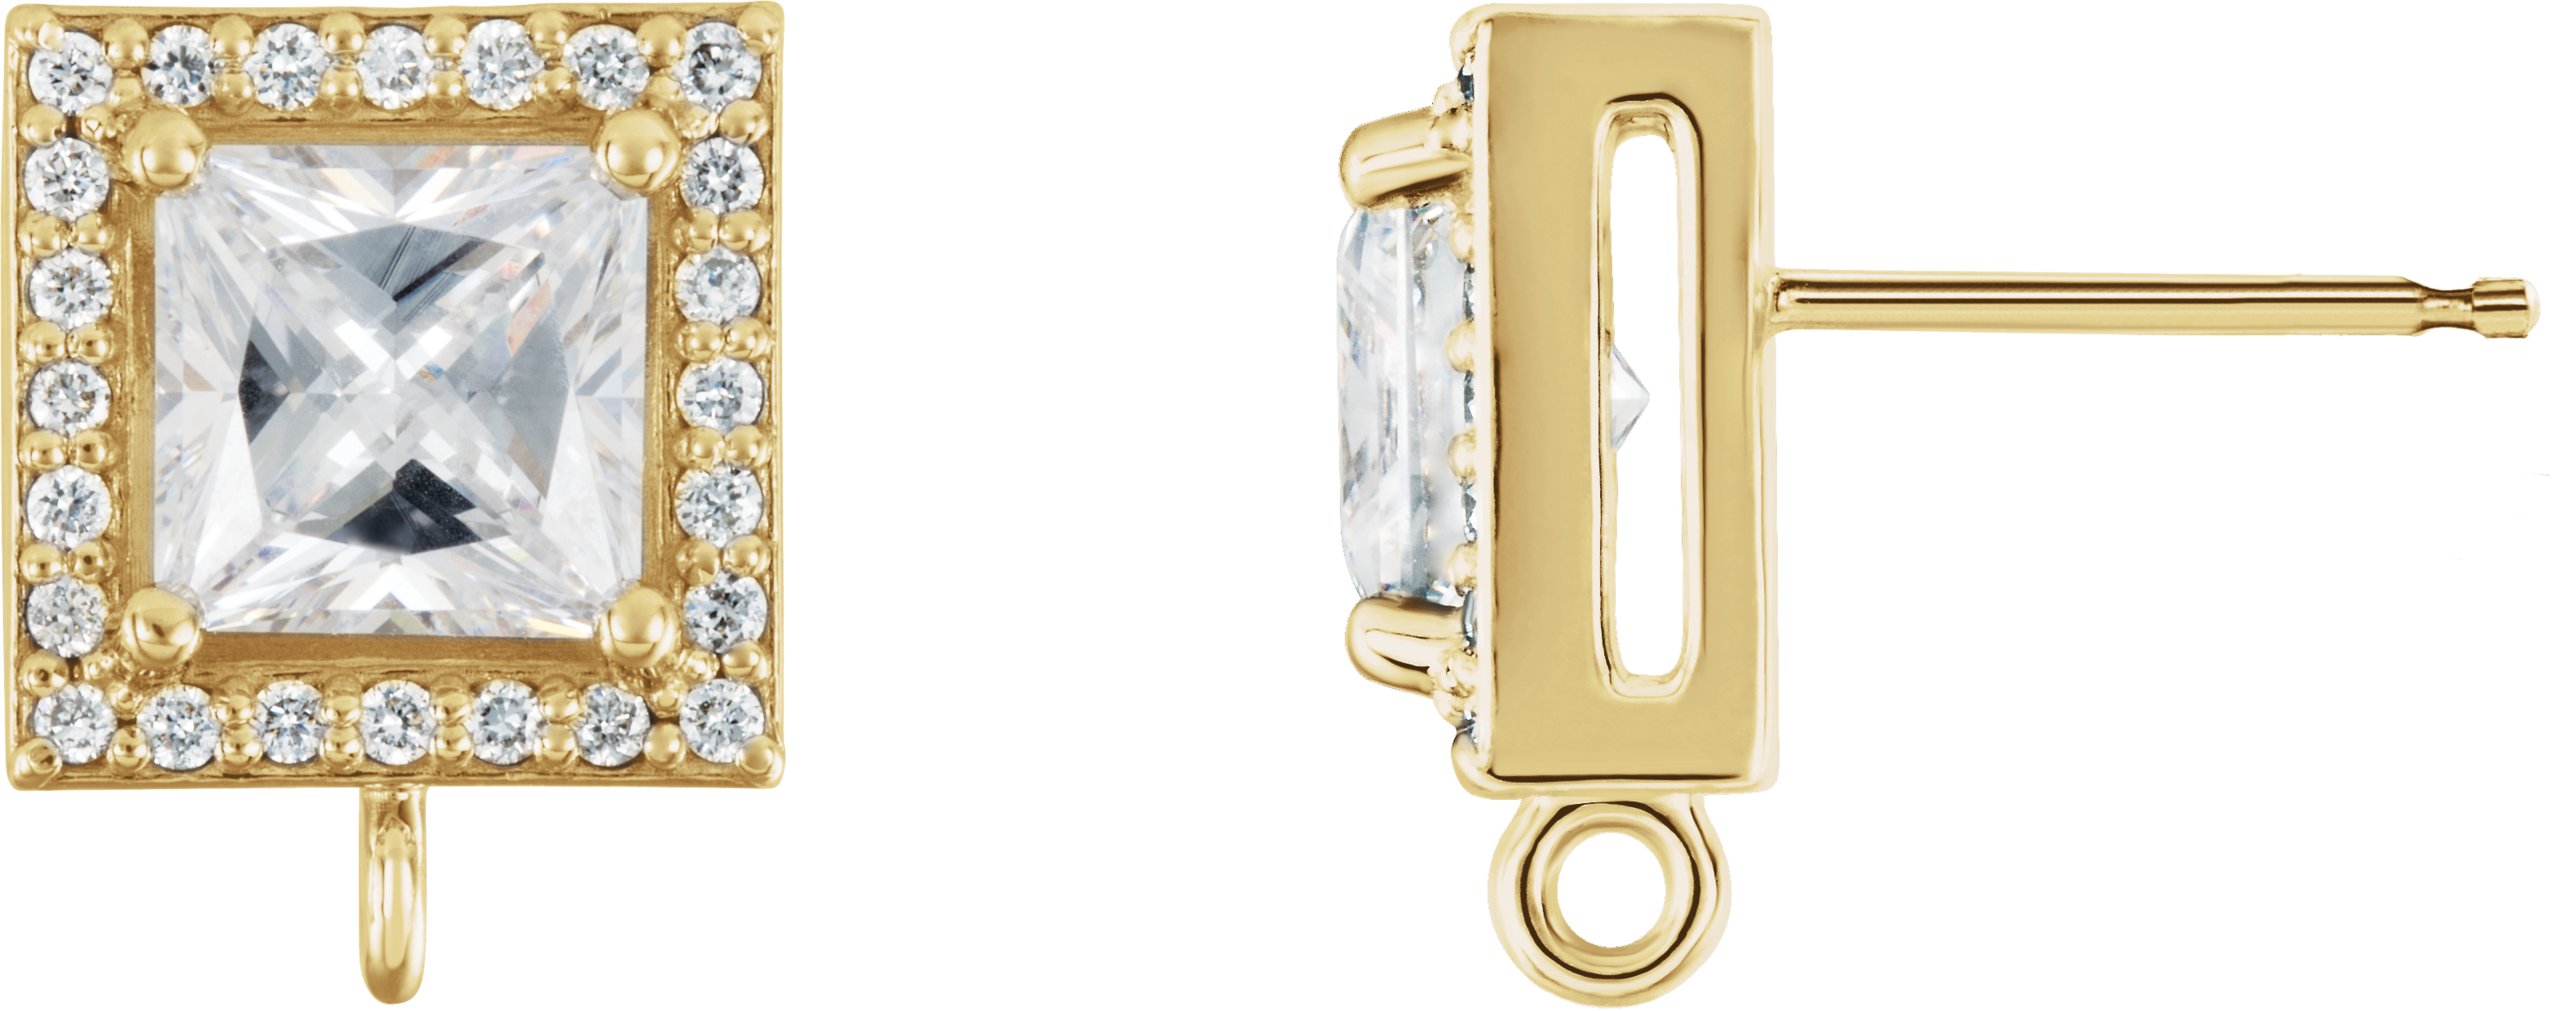 Square 4-Prong Halo-Style Earring with Jump Ring